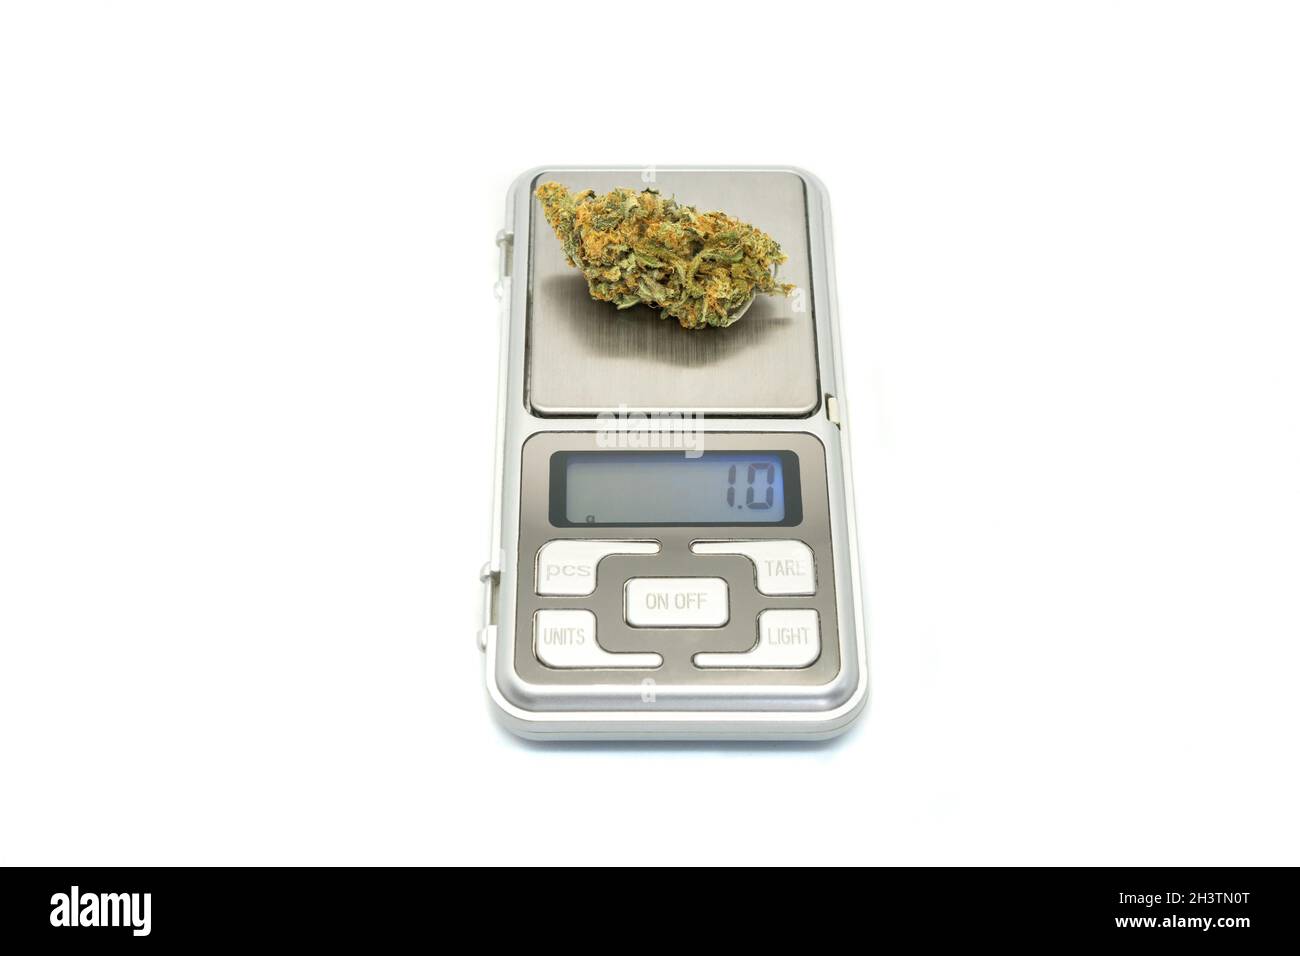 https://c8.alamy.com/comp/2H3TN0T/digital-weight-weighing-marijuana-buds-isolated-on-white-background-a-gram-of-cannabis-on-digital-scale-2H3TN0T.jpg